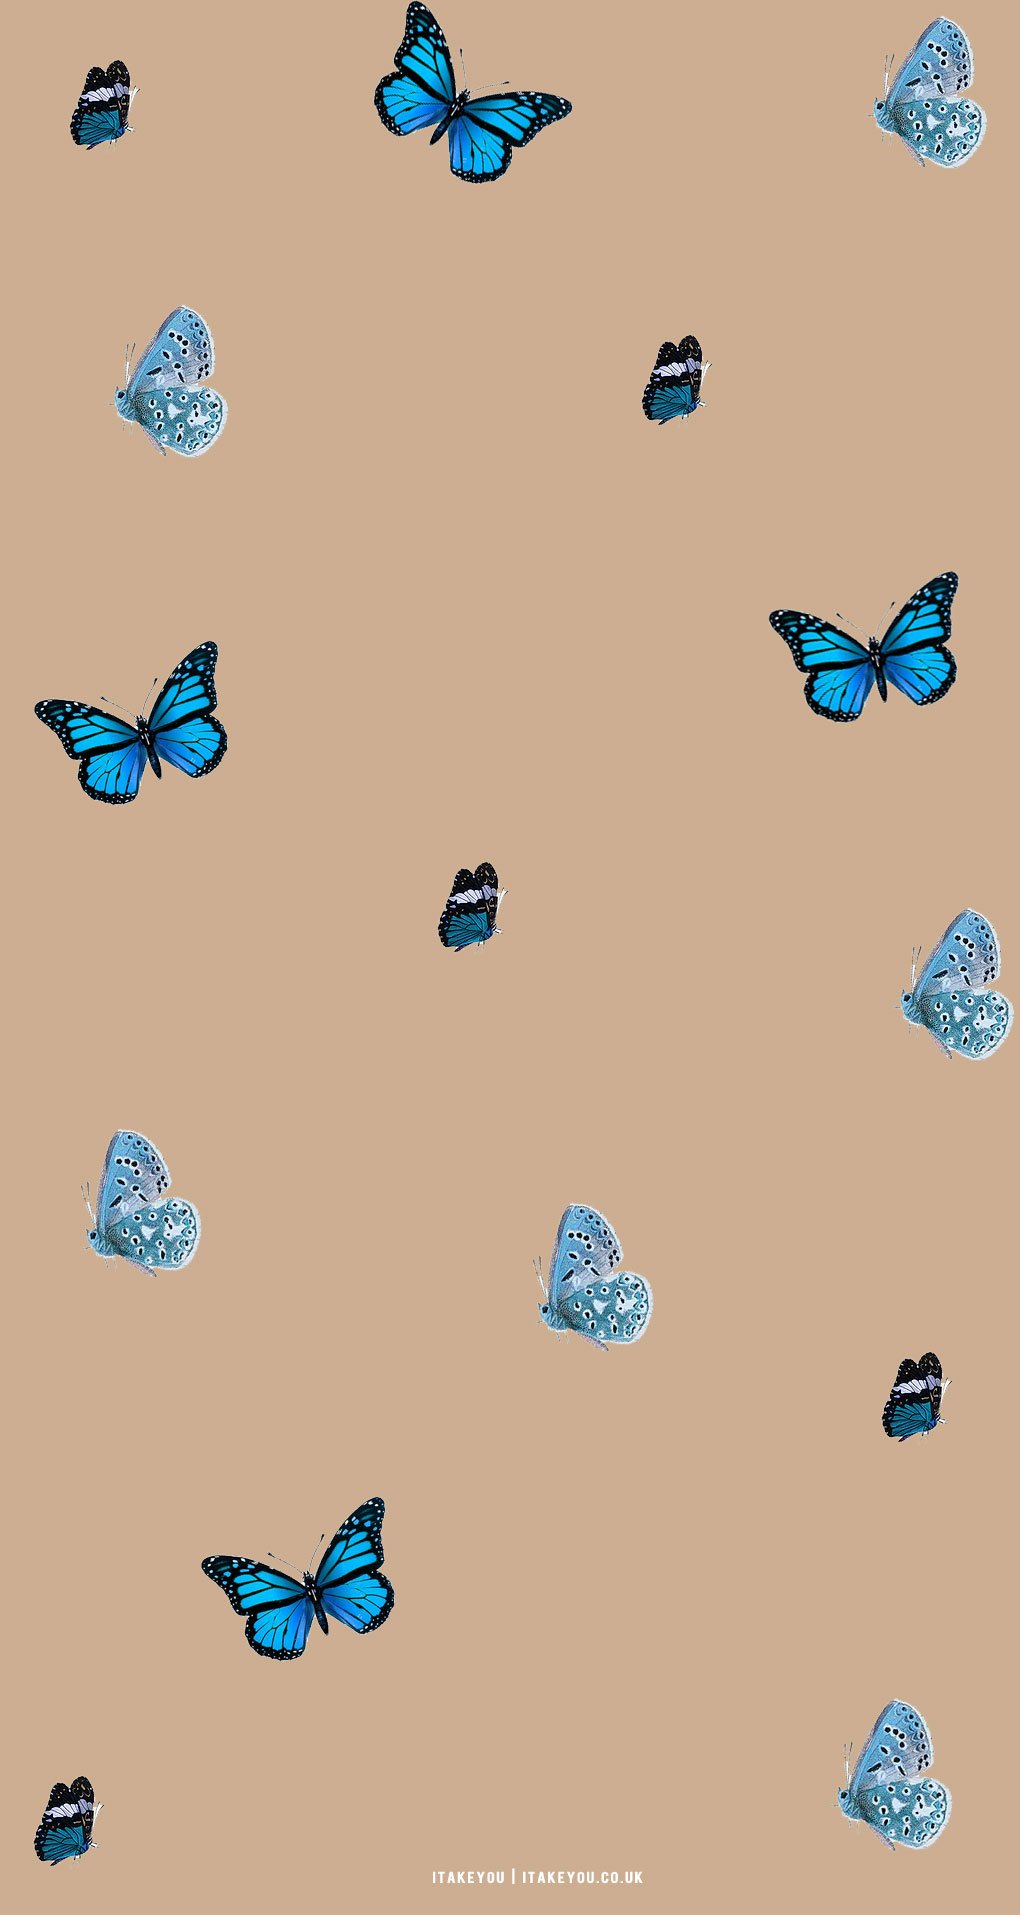 Cute Brown Aesthetic Wallpaper for Phone, Butterflies I Take You. Wedding Readings. Wedding Ideas